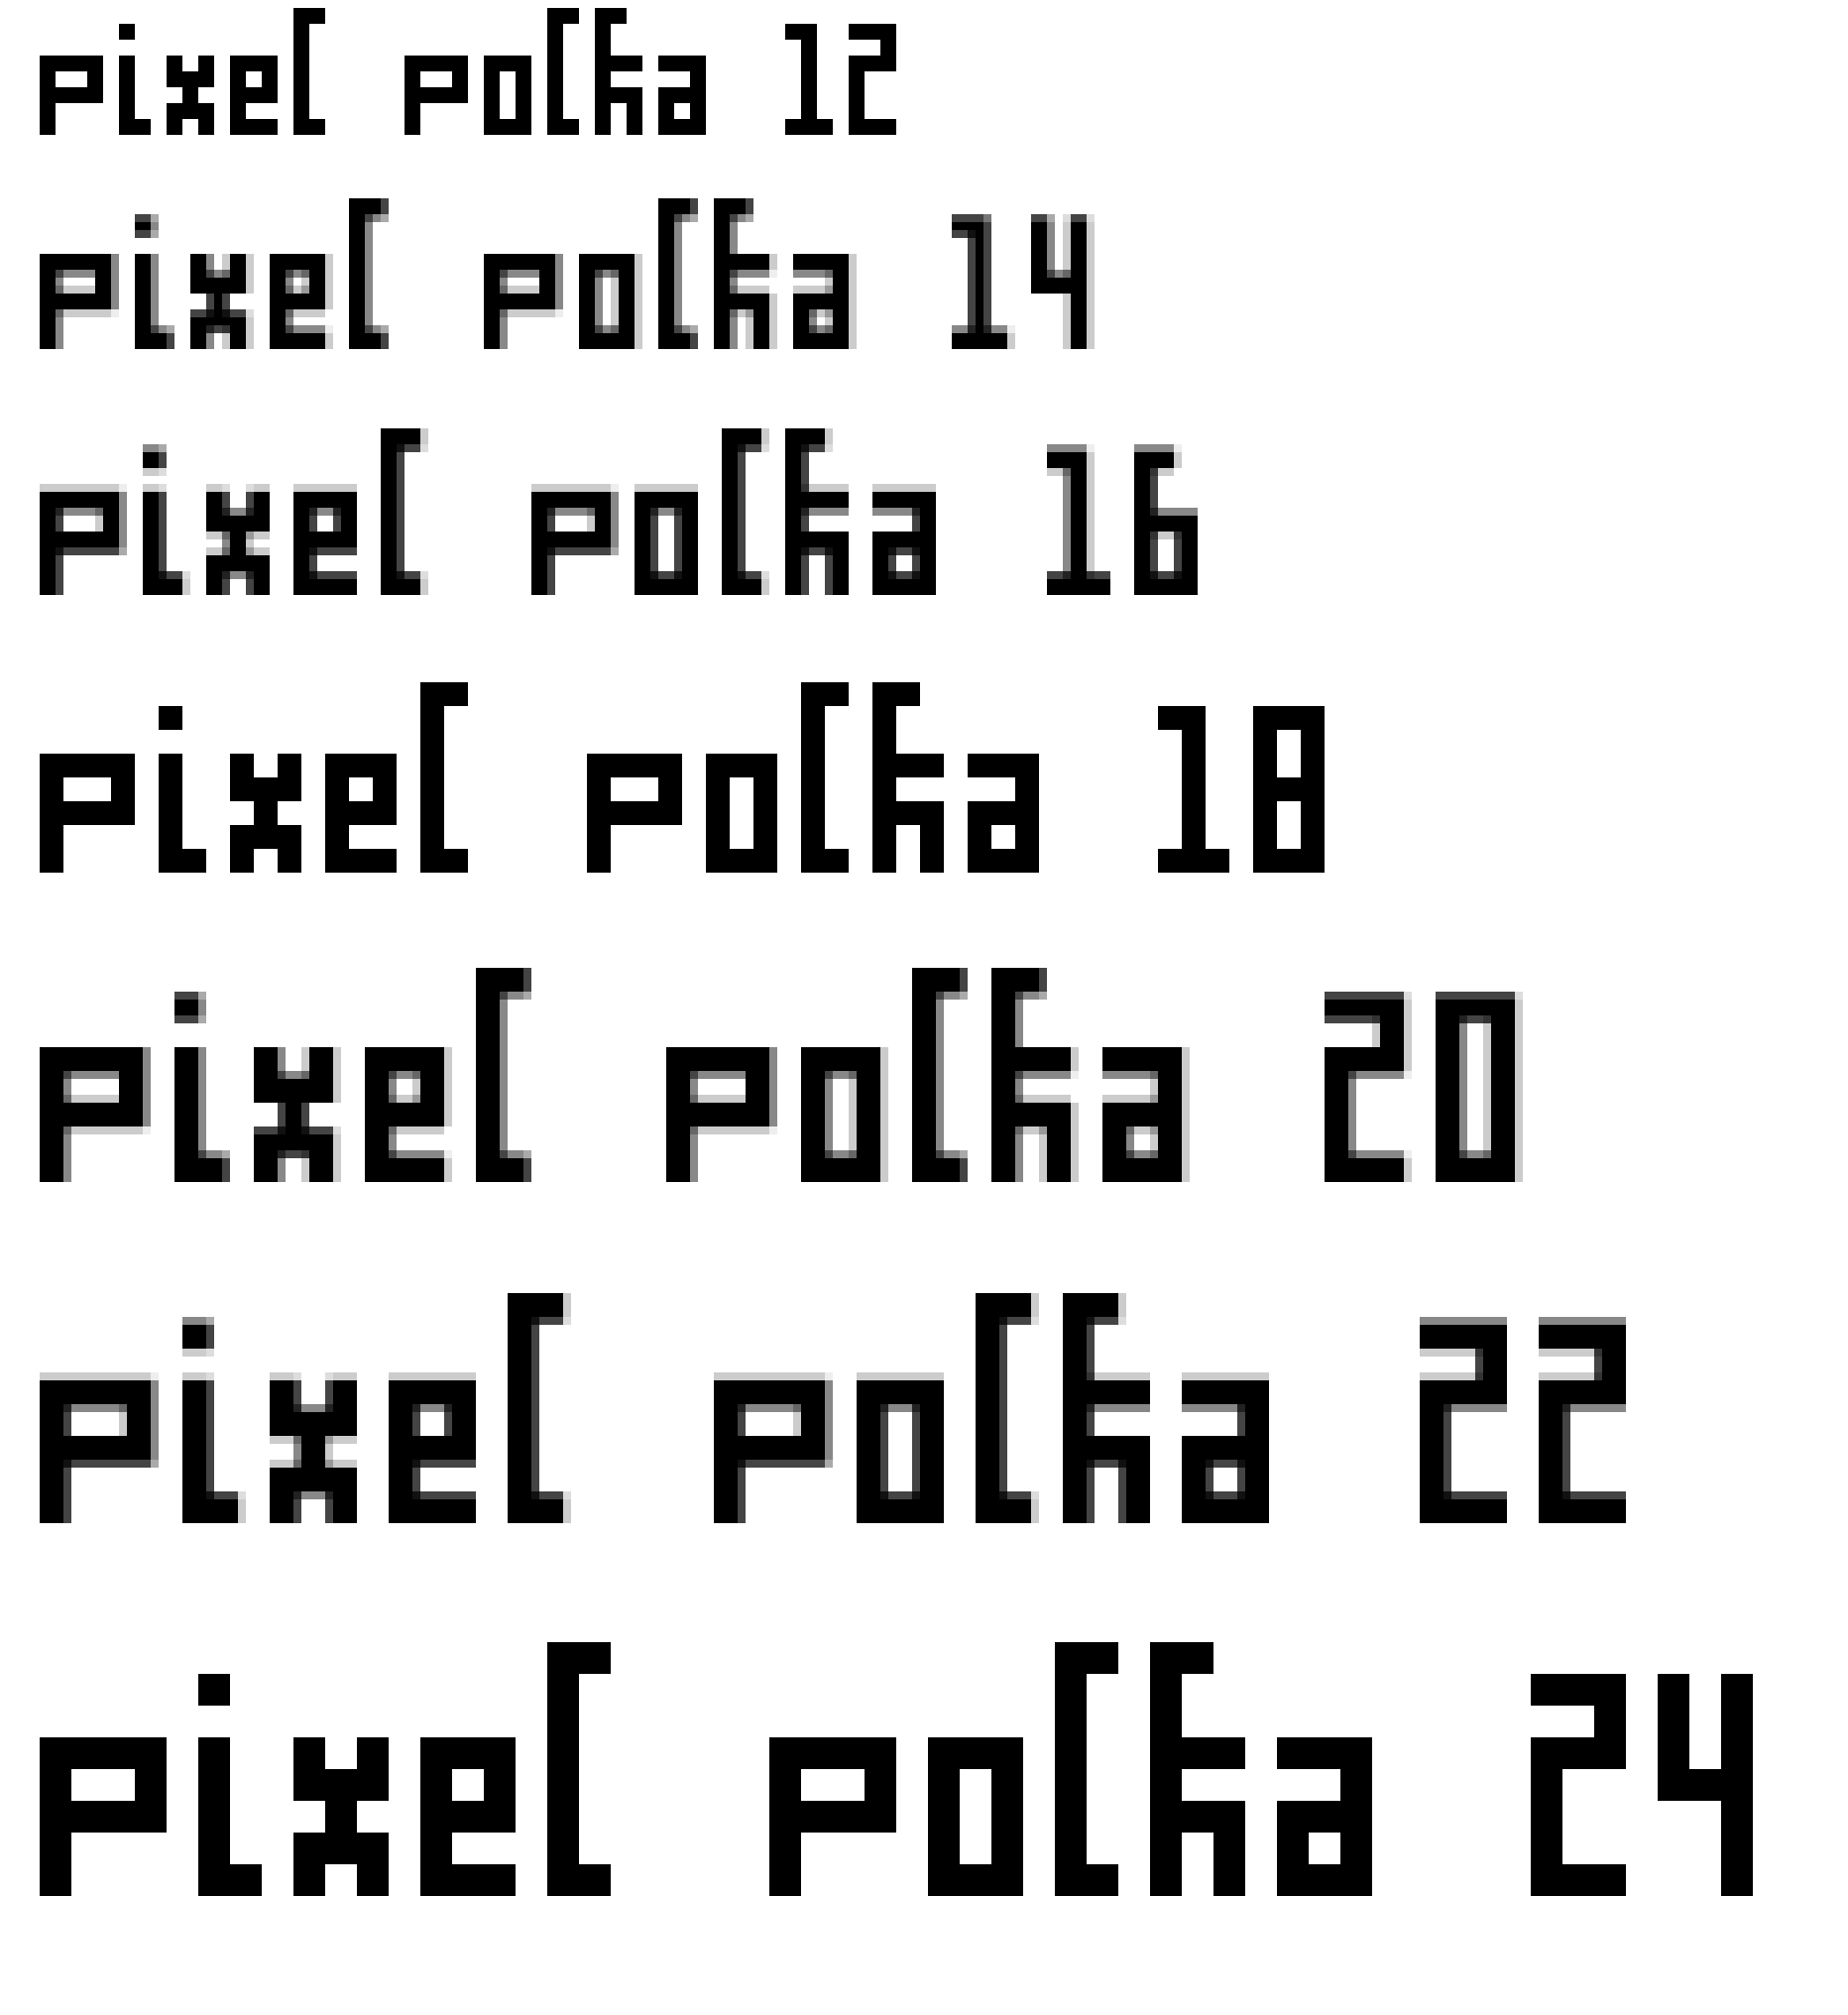 A part of a Print Screen image from WordPad, enlarged by 800% before saving as a png file.